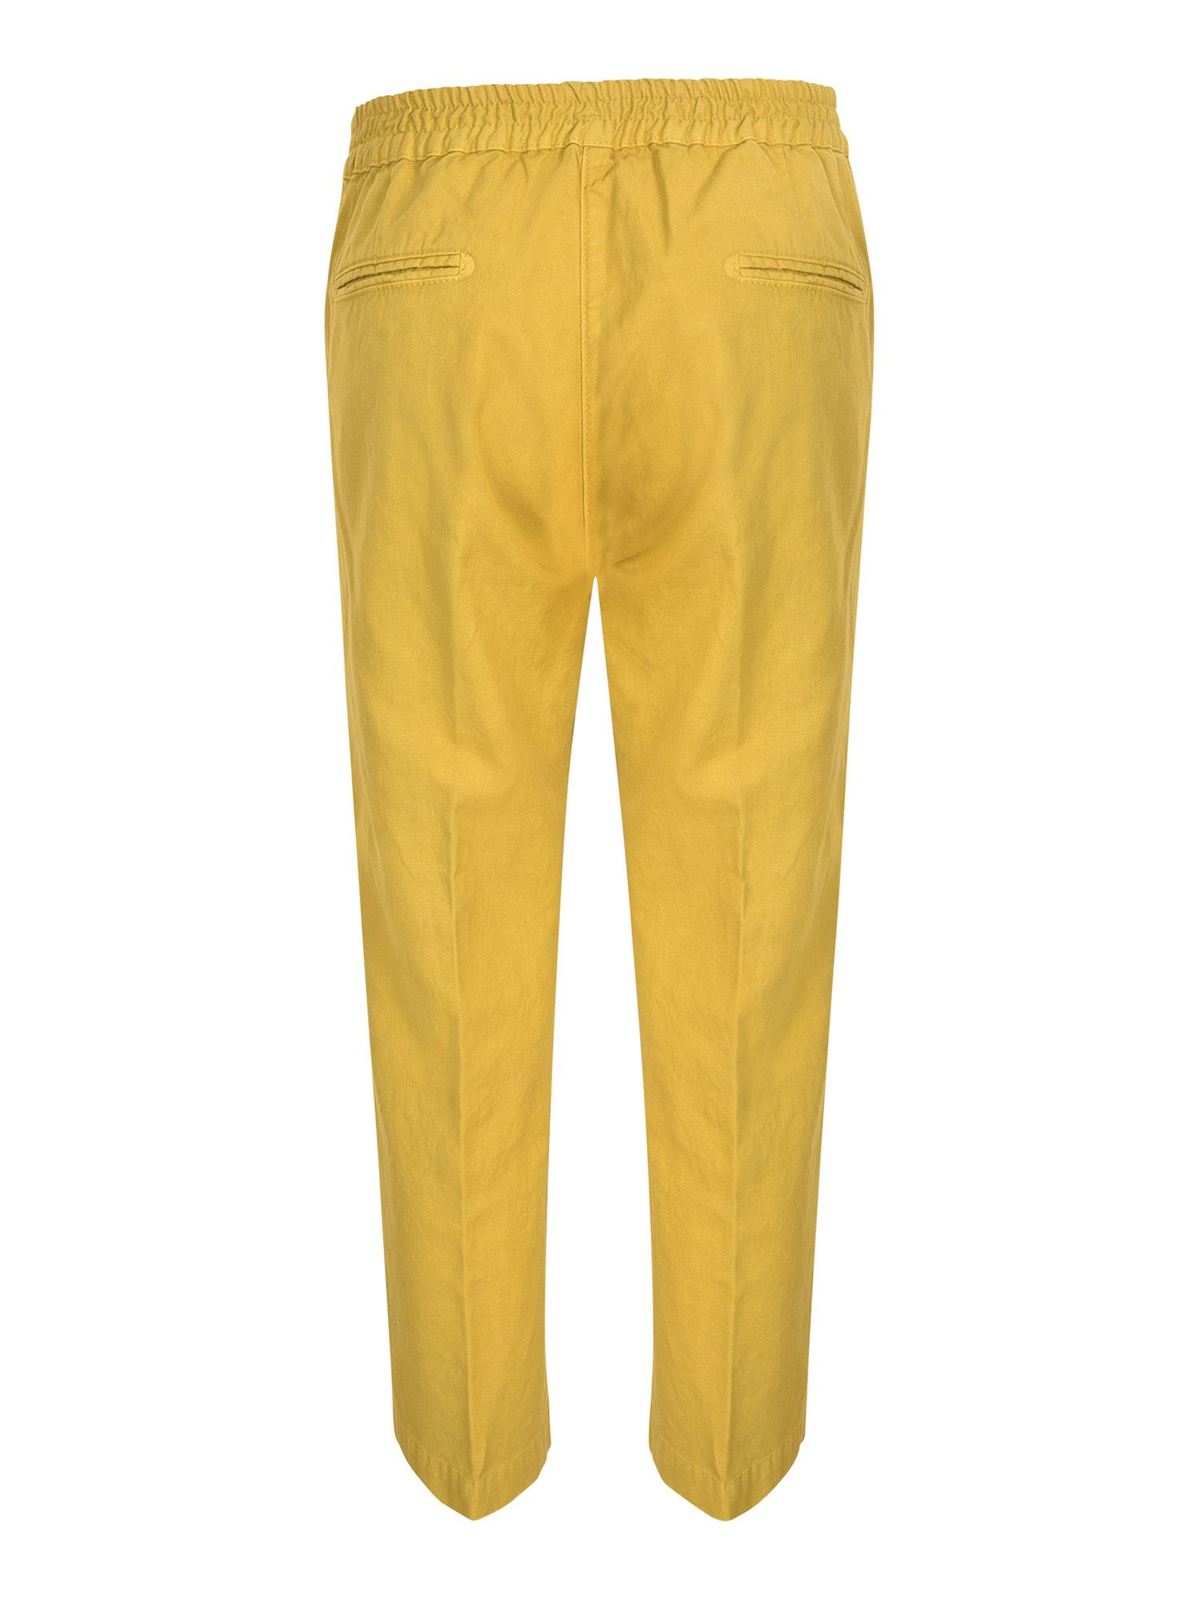 Massimo Alba - Sparus pants in mustard color - casual trousers ...